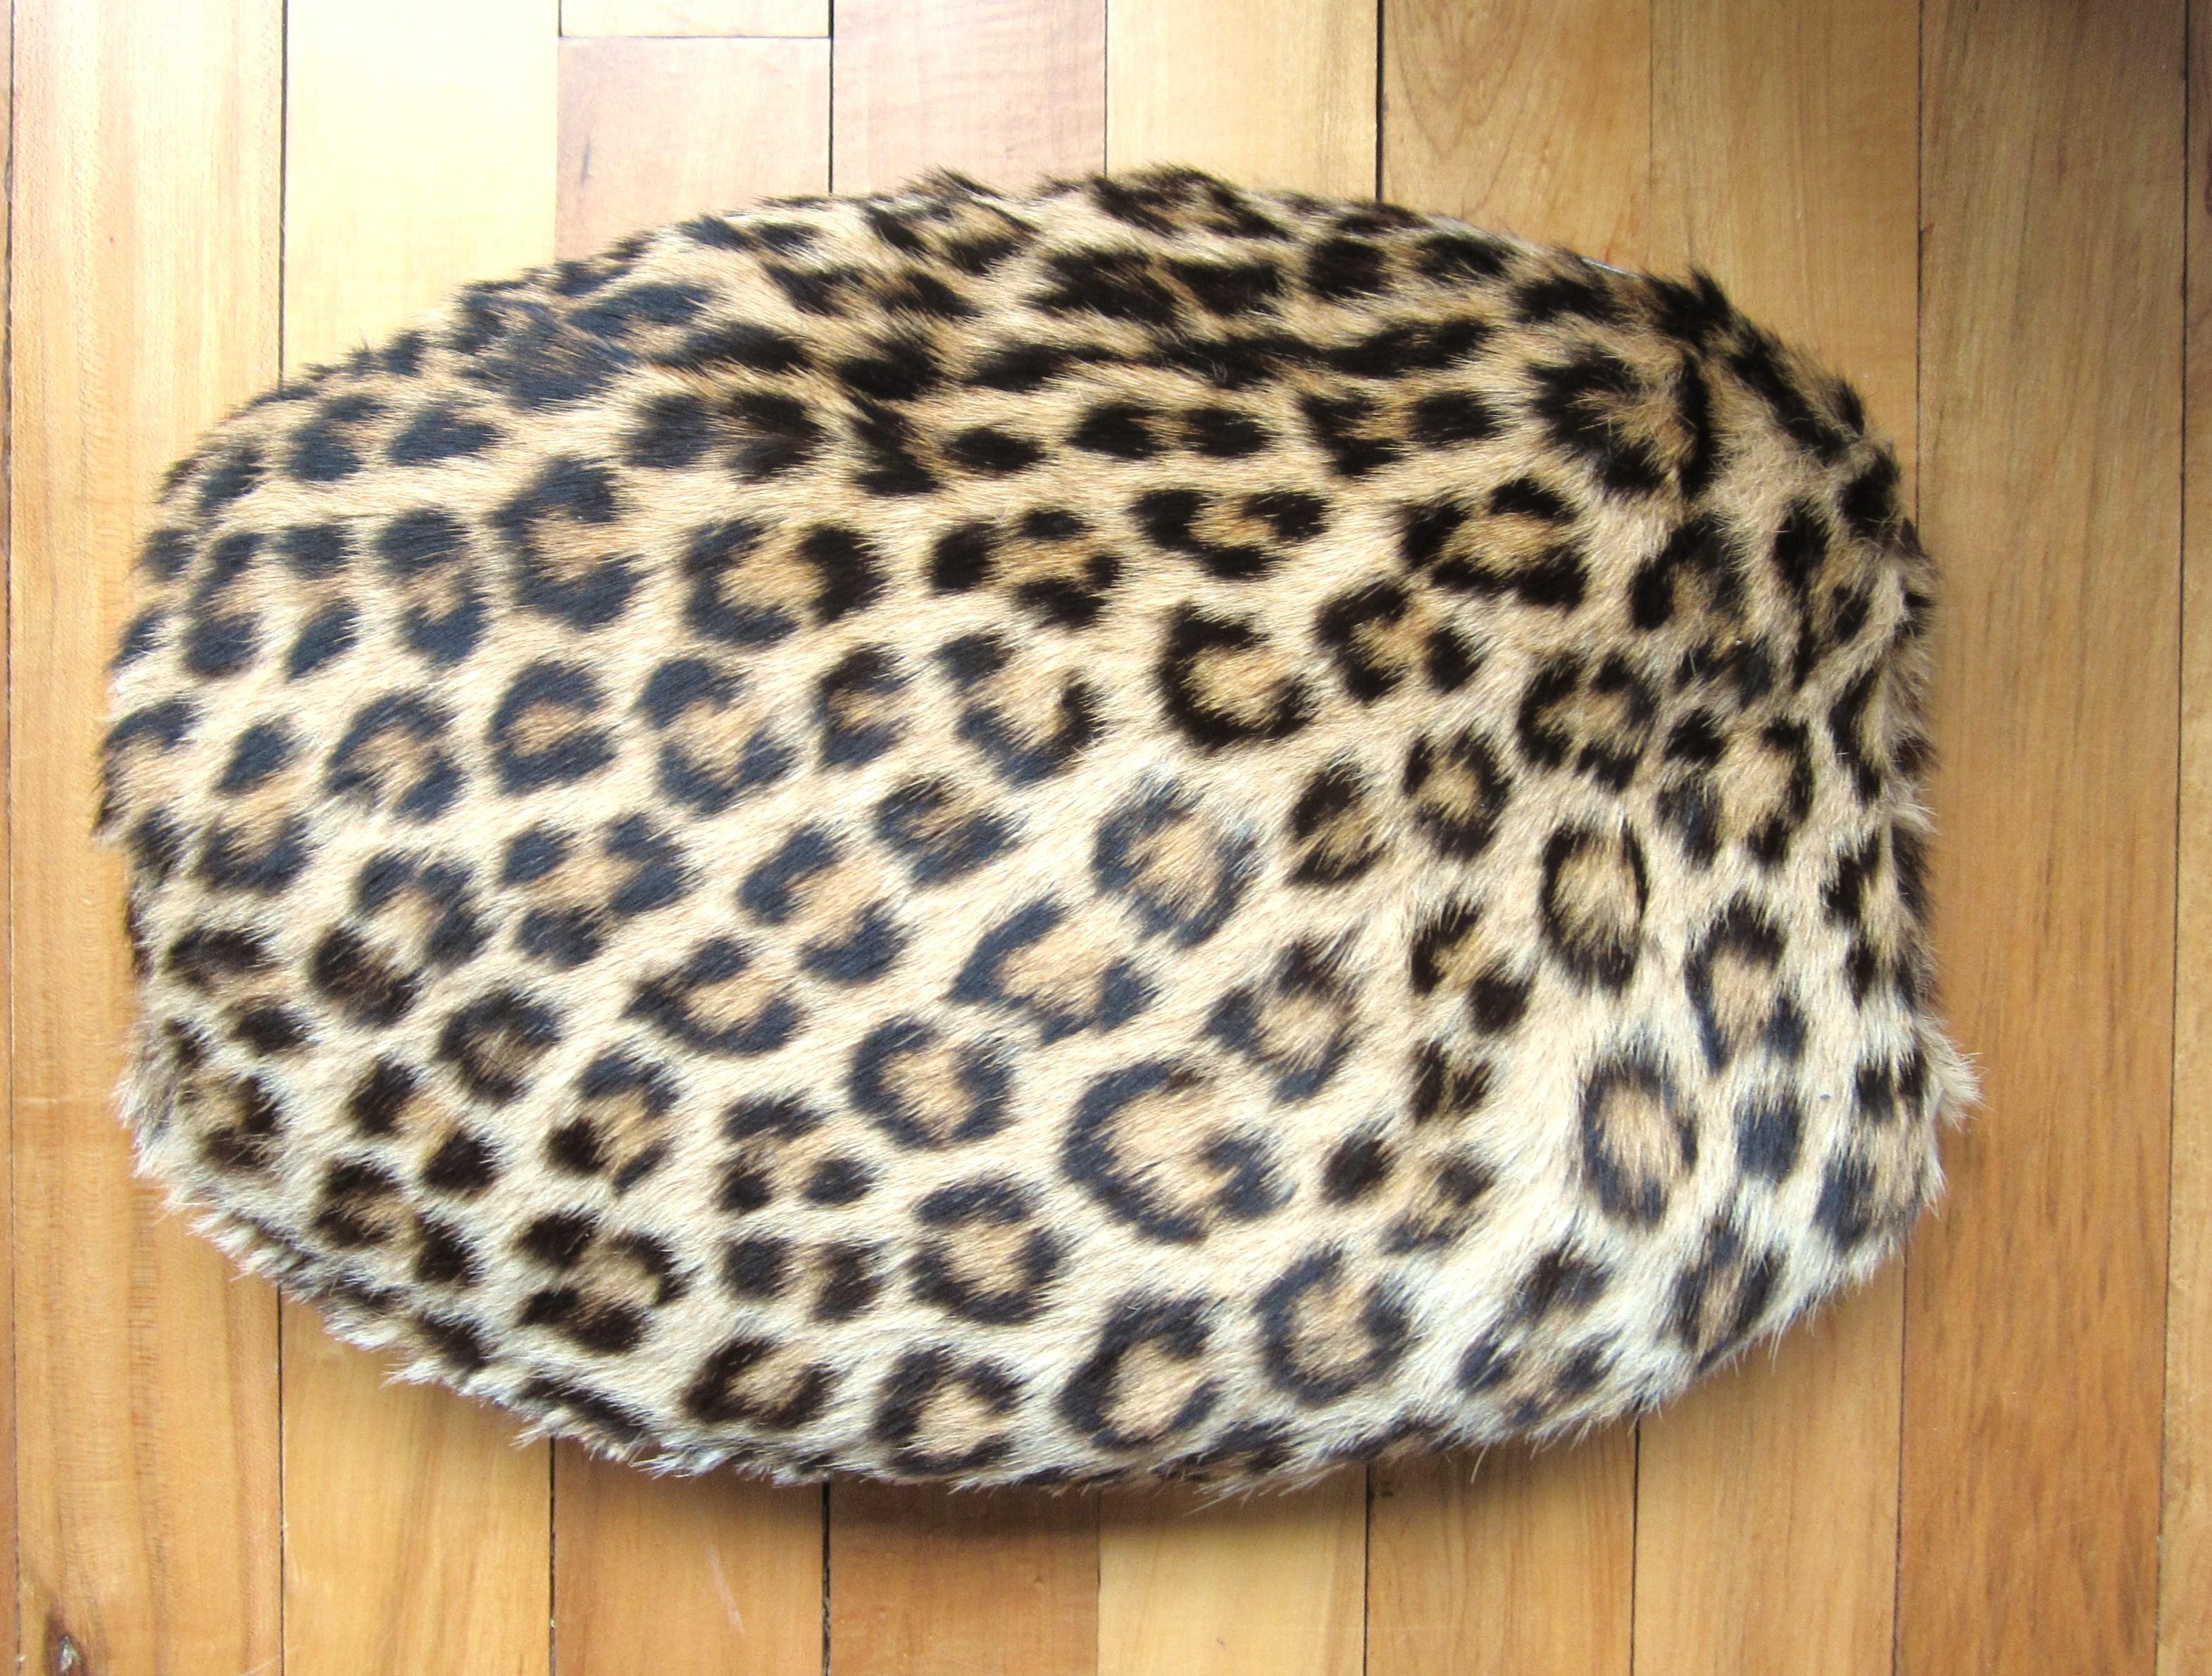 Stunning Leopard print vintage muff. Soft & Supple, no rips or smells. Zippers open on the top with opening to keep your hands toasty warm. Measures 14in. wide x 11in. high. Zipper does not close (about an 1